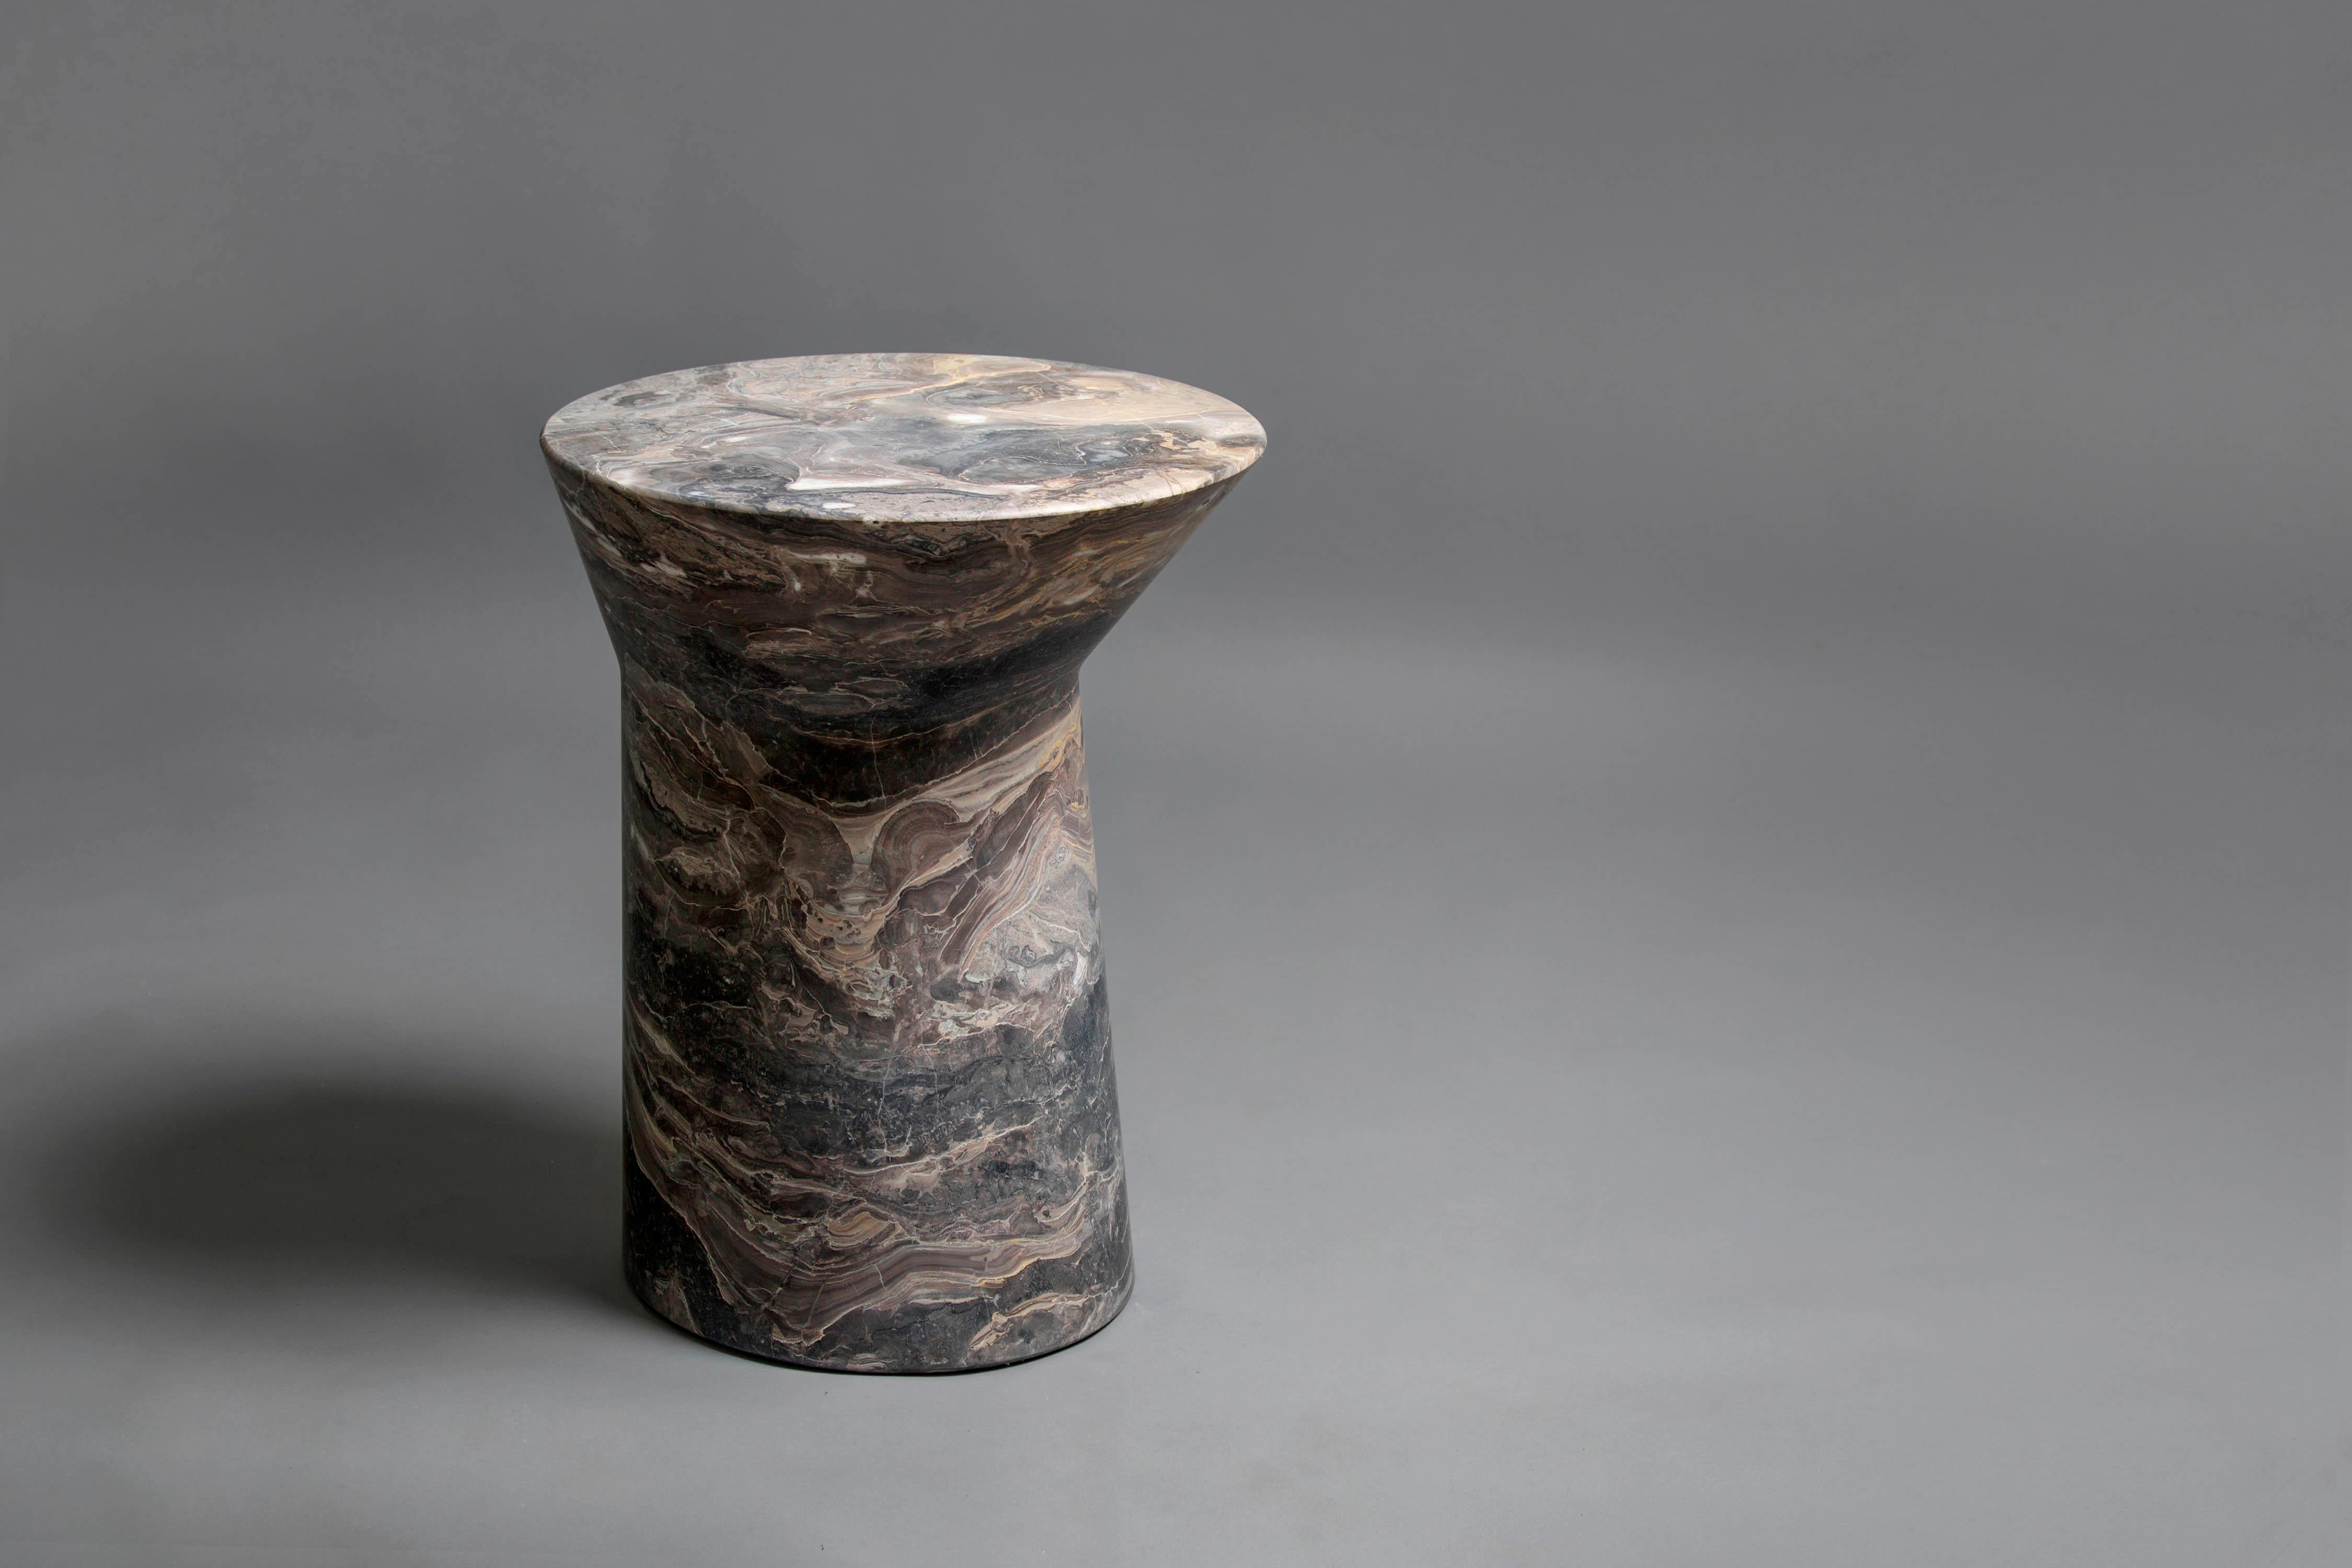 Chinese Io Side Table in Grey Orobico Marble by Adolfo Abejon for Formar